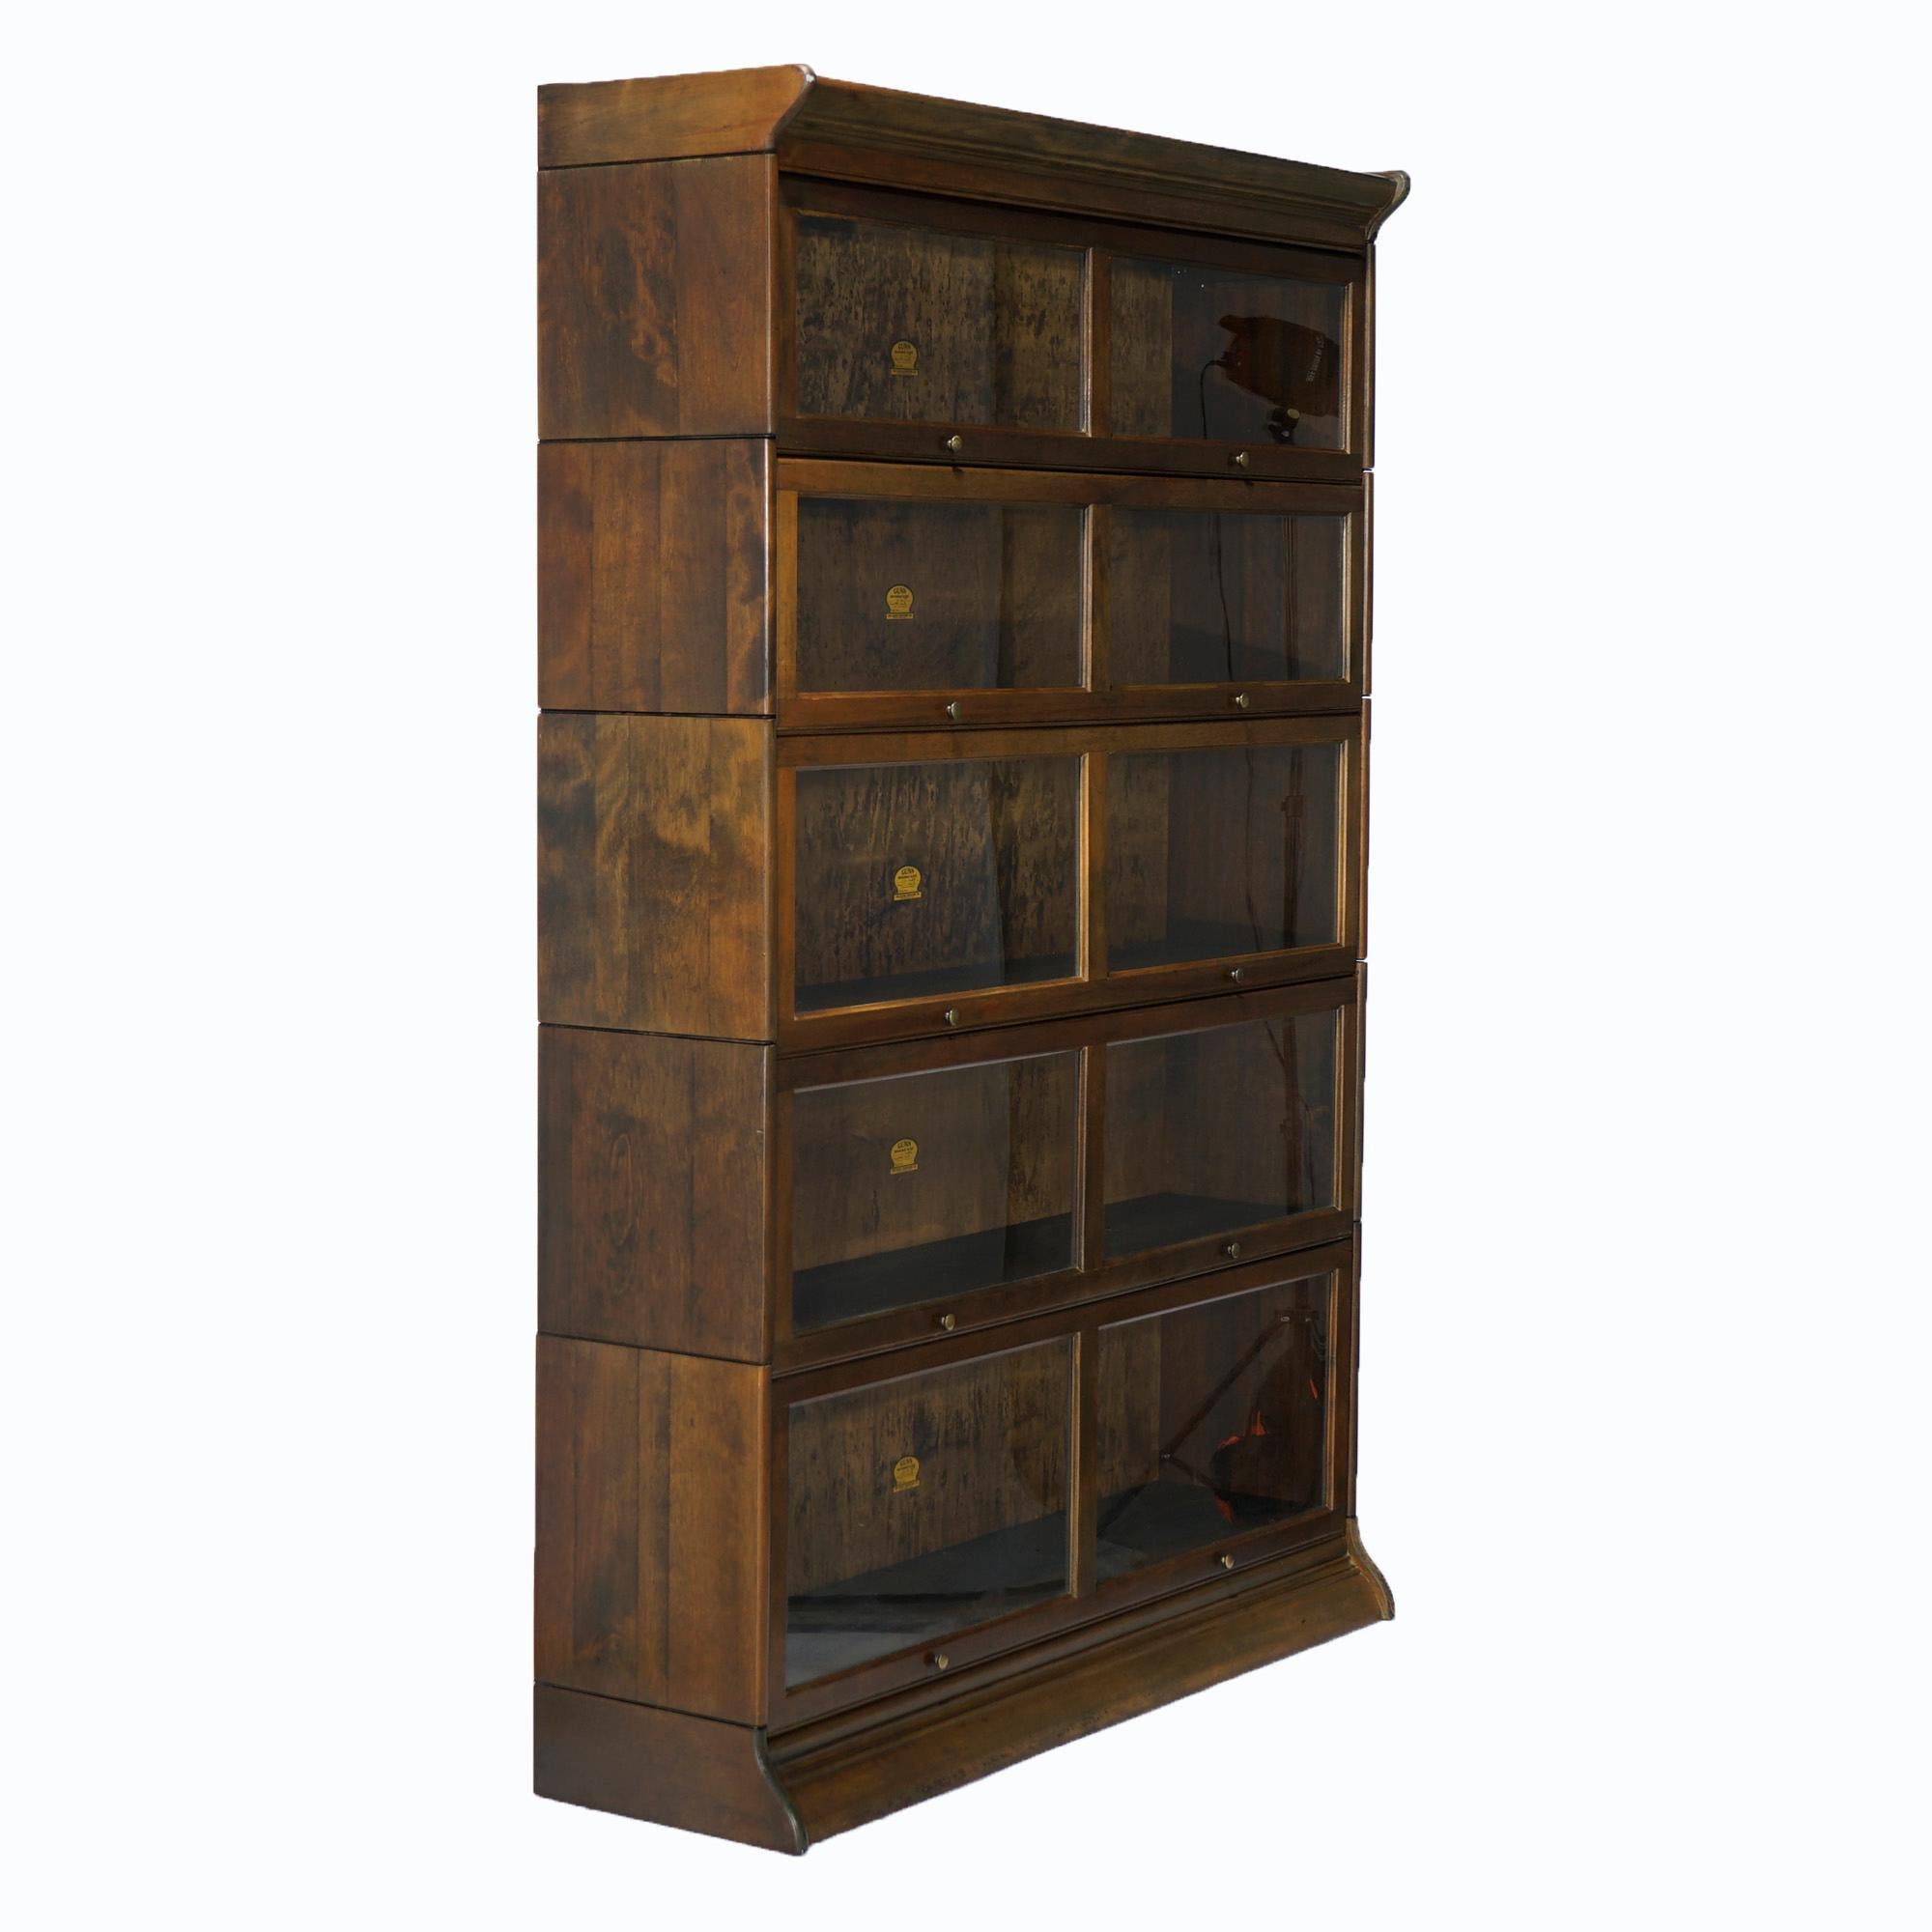 An antique Arts & Crafts double barrister bookcase by Gunn offers mahogany construction with five stacks, each with pull out glass doors and raised on ogee base, maker label as photographed, c1910.

Measures- overall 72.75''H x 50.5''W x 14.5''D;